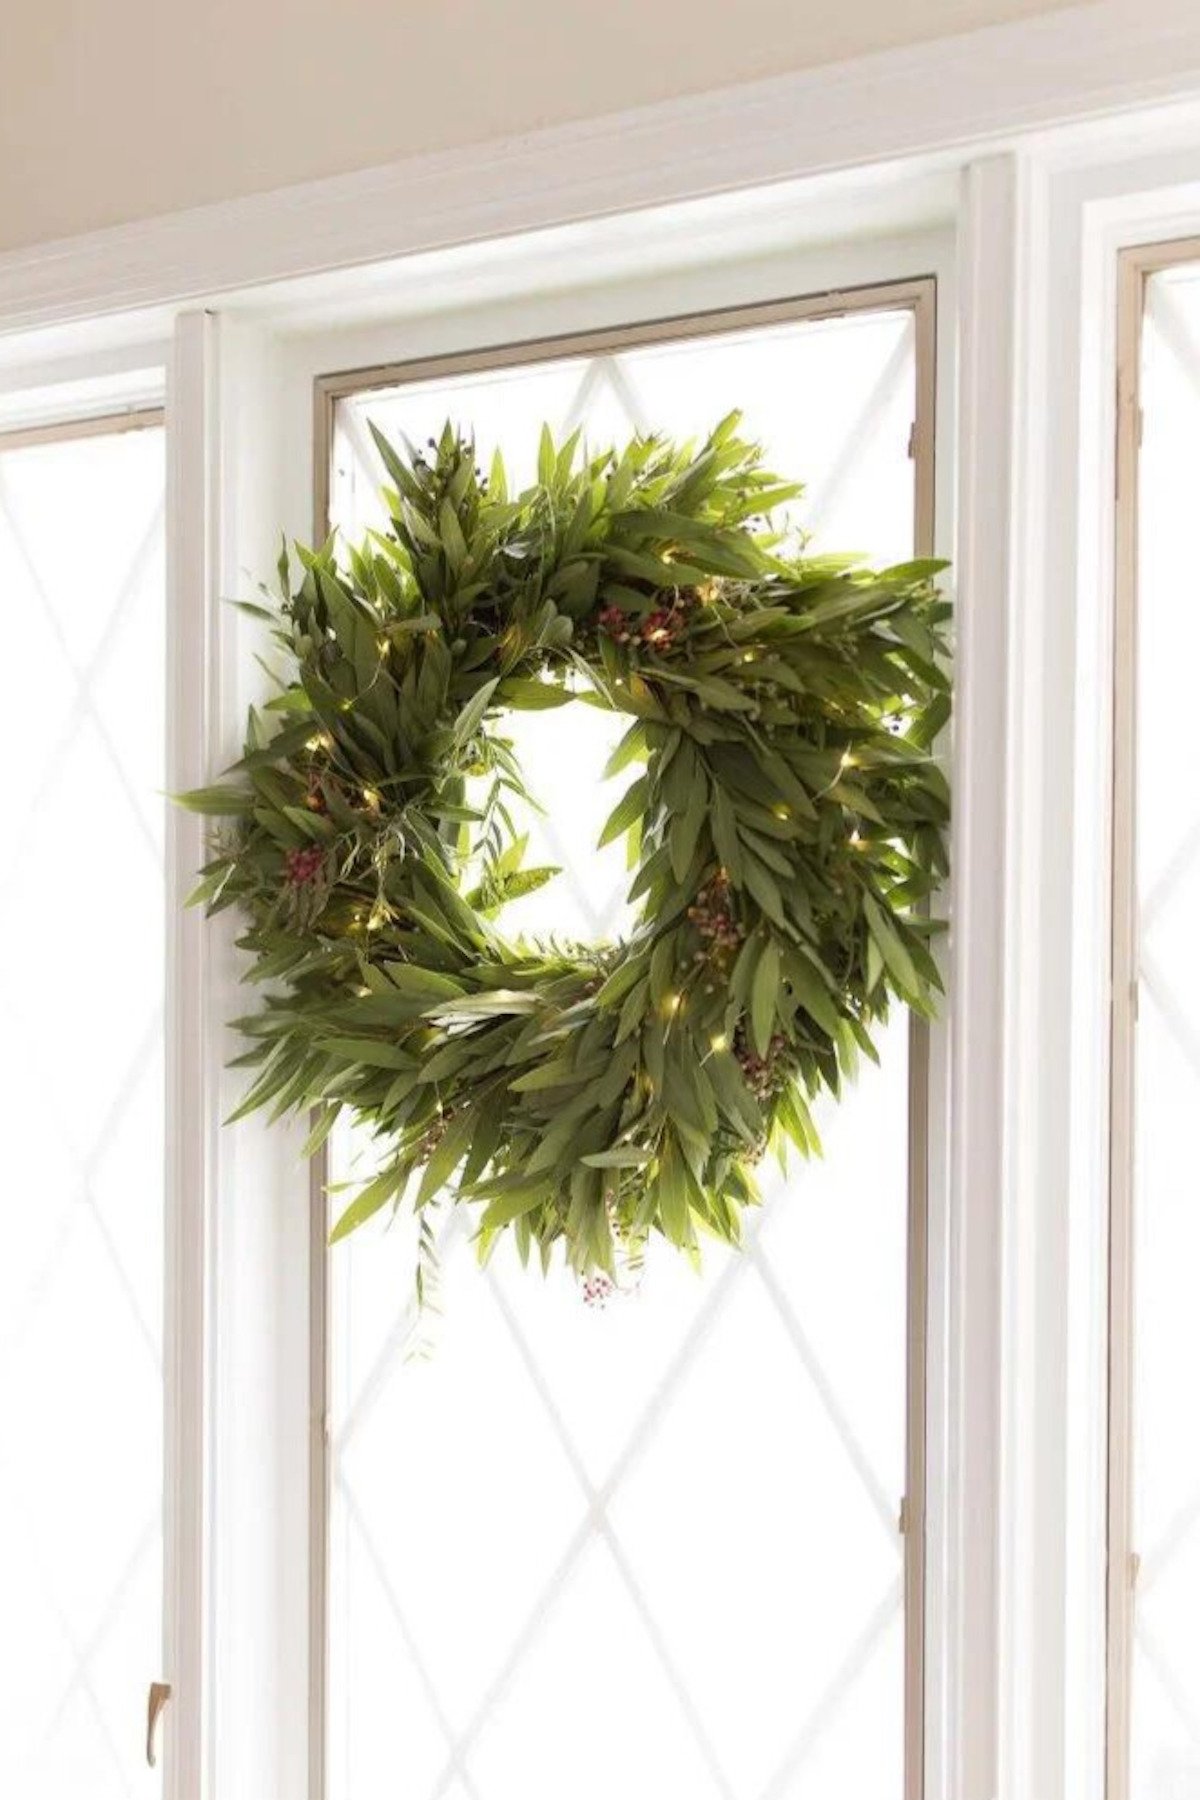 A wreath hanging on a window sill adorned with Christmas lights.